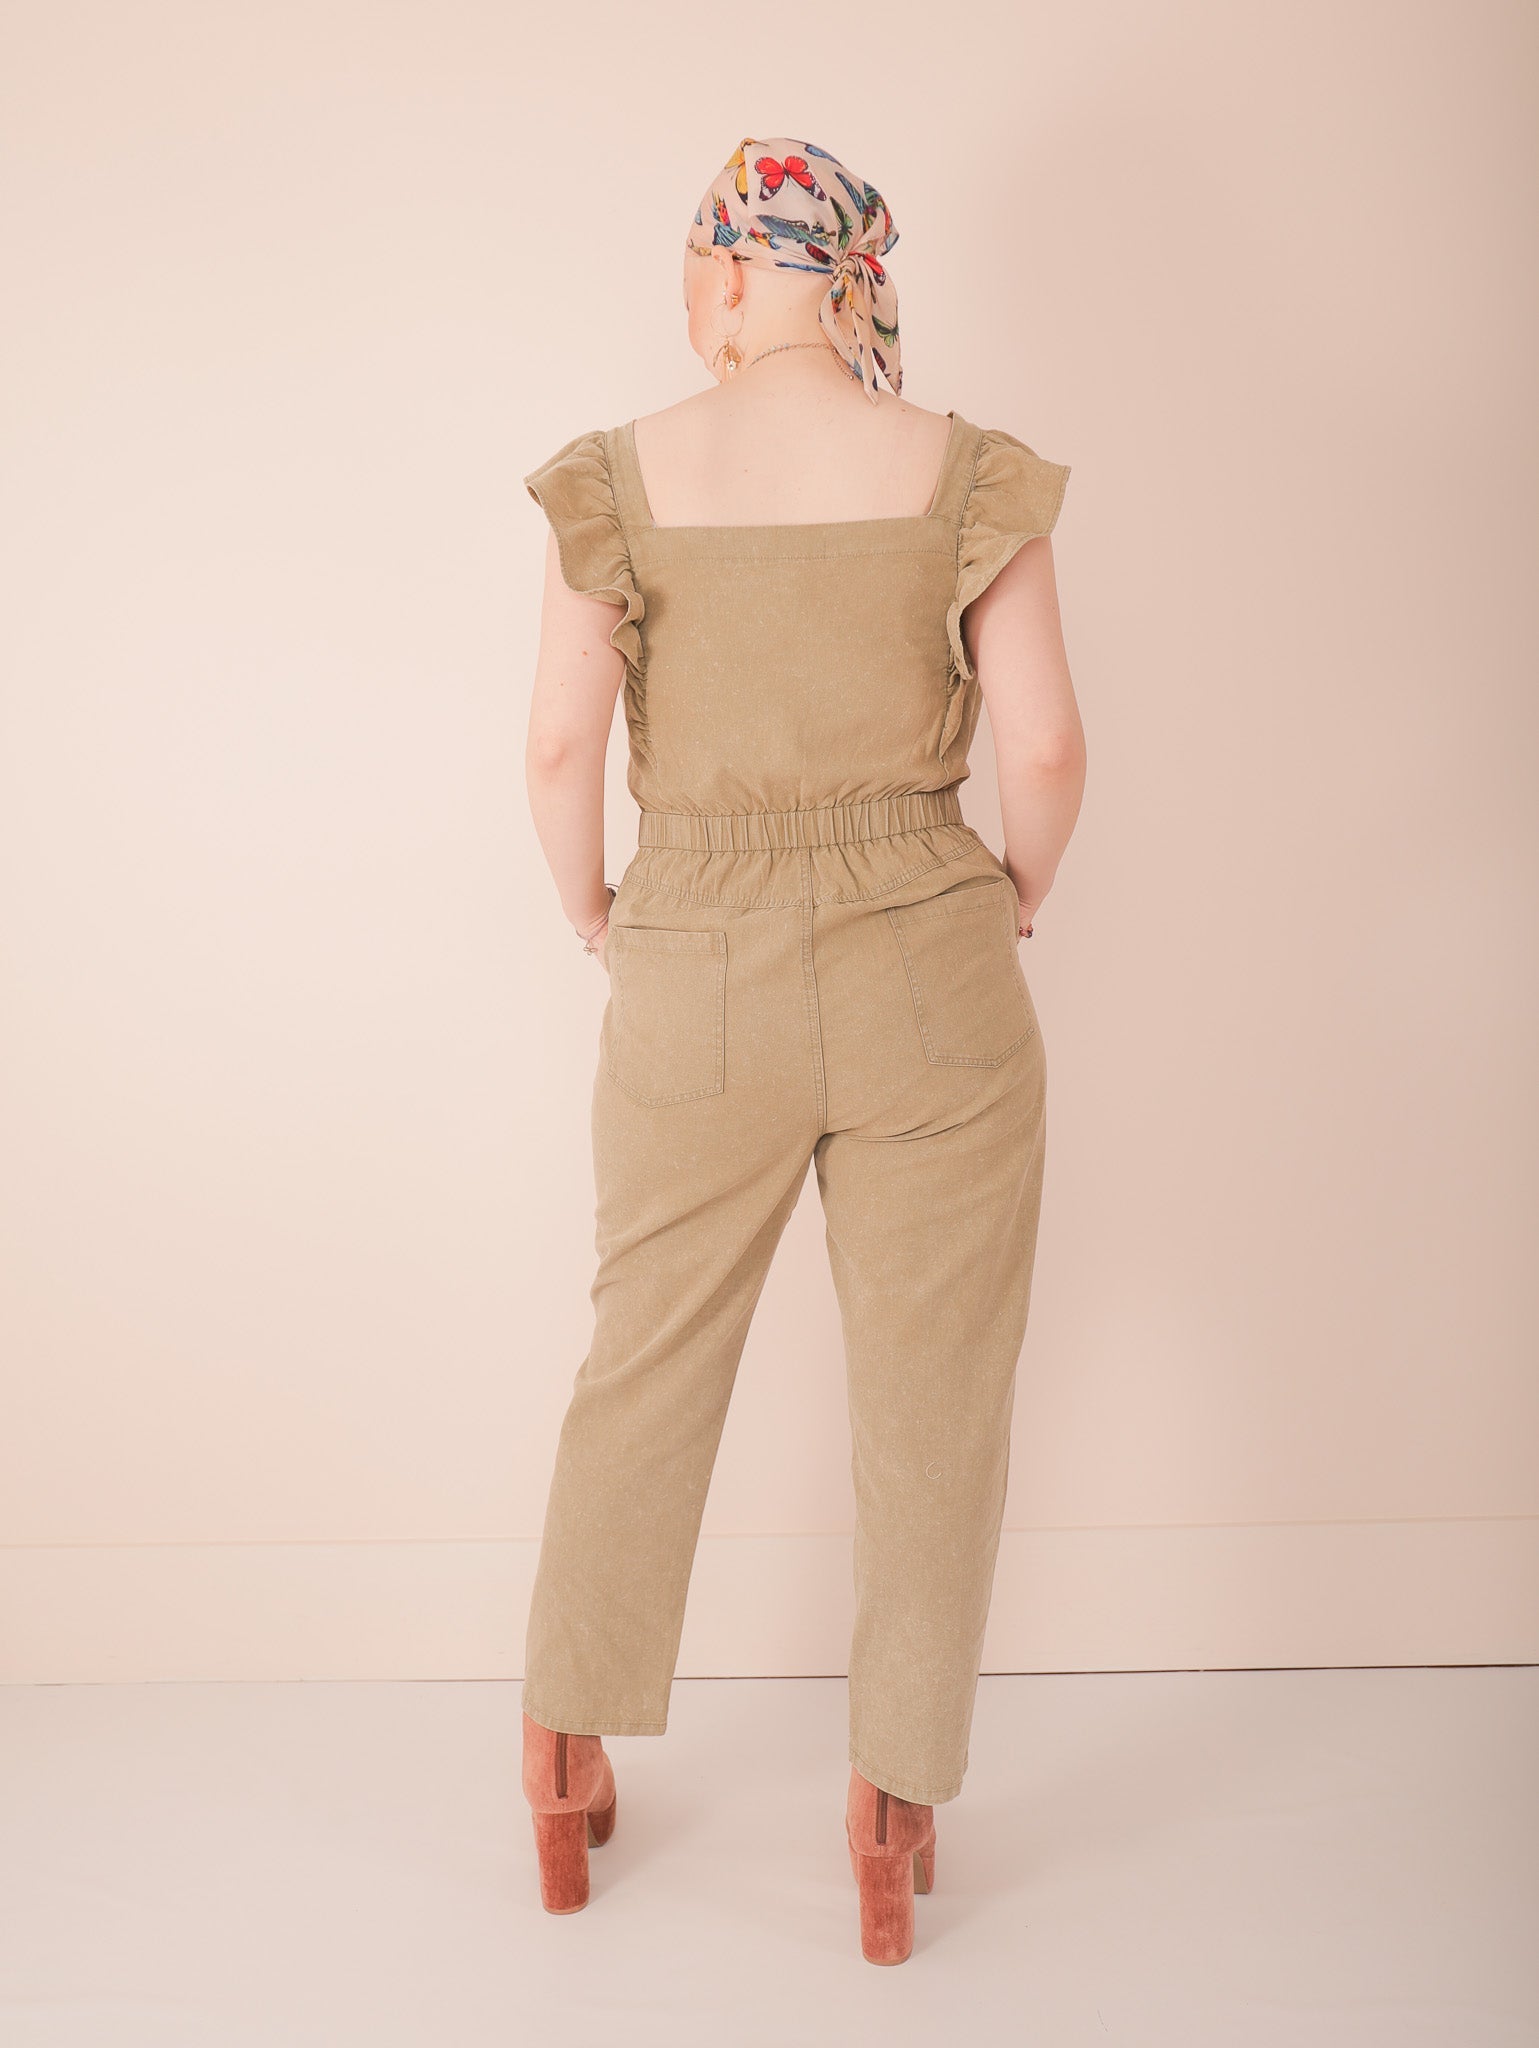 Molly Green - Fiora Ruffle Denim Jumpsuit - Rompers _ Jumpsuits